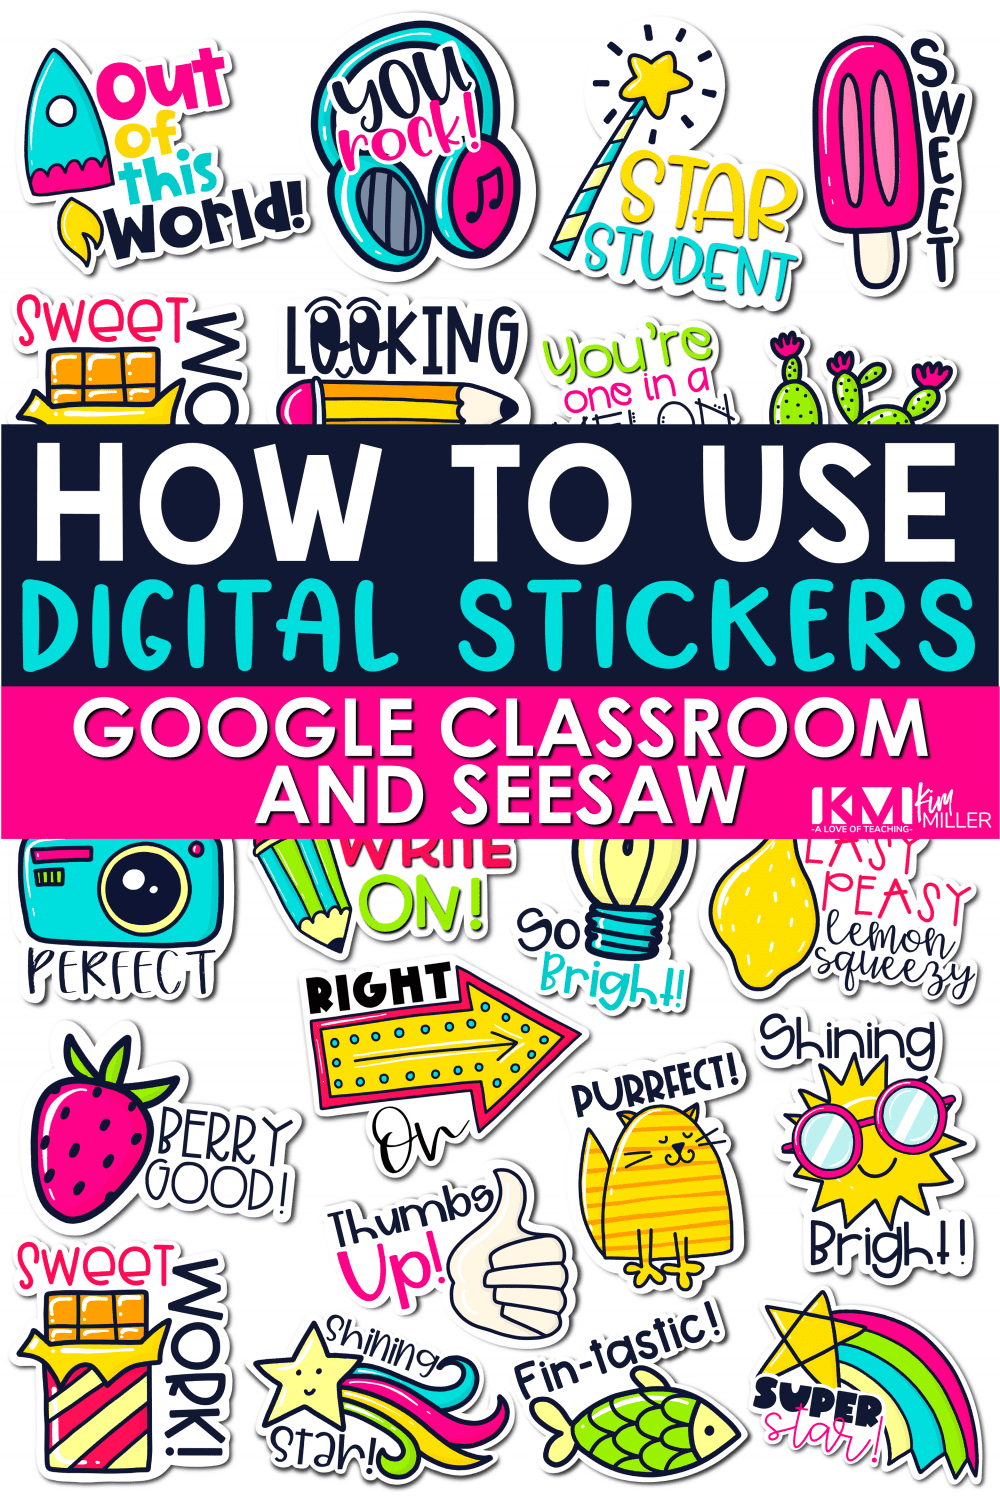 How to Use Digital Stickers for Google Classroom and SeeSaw